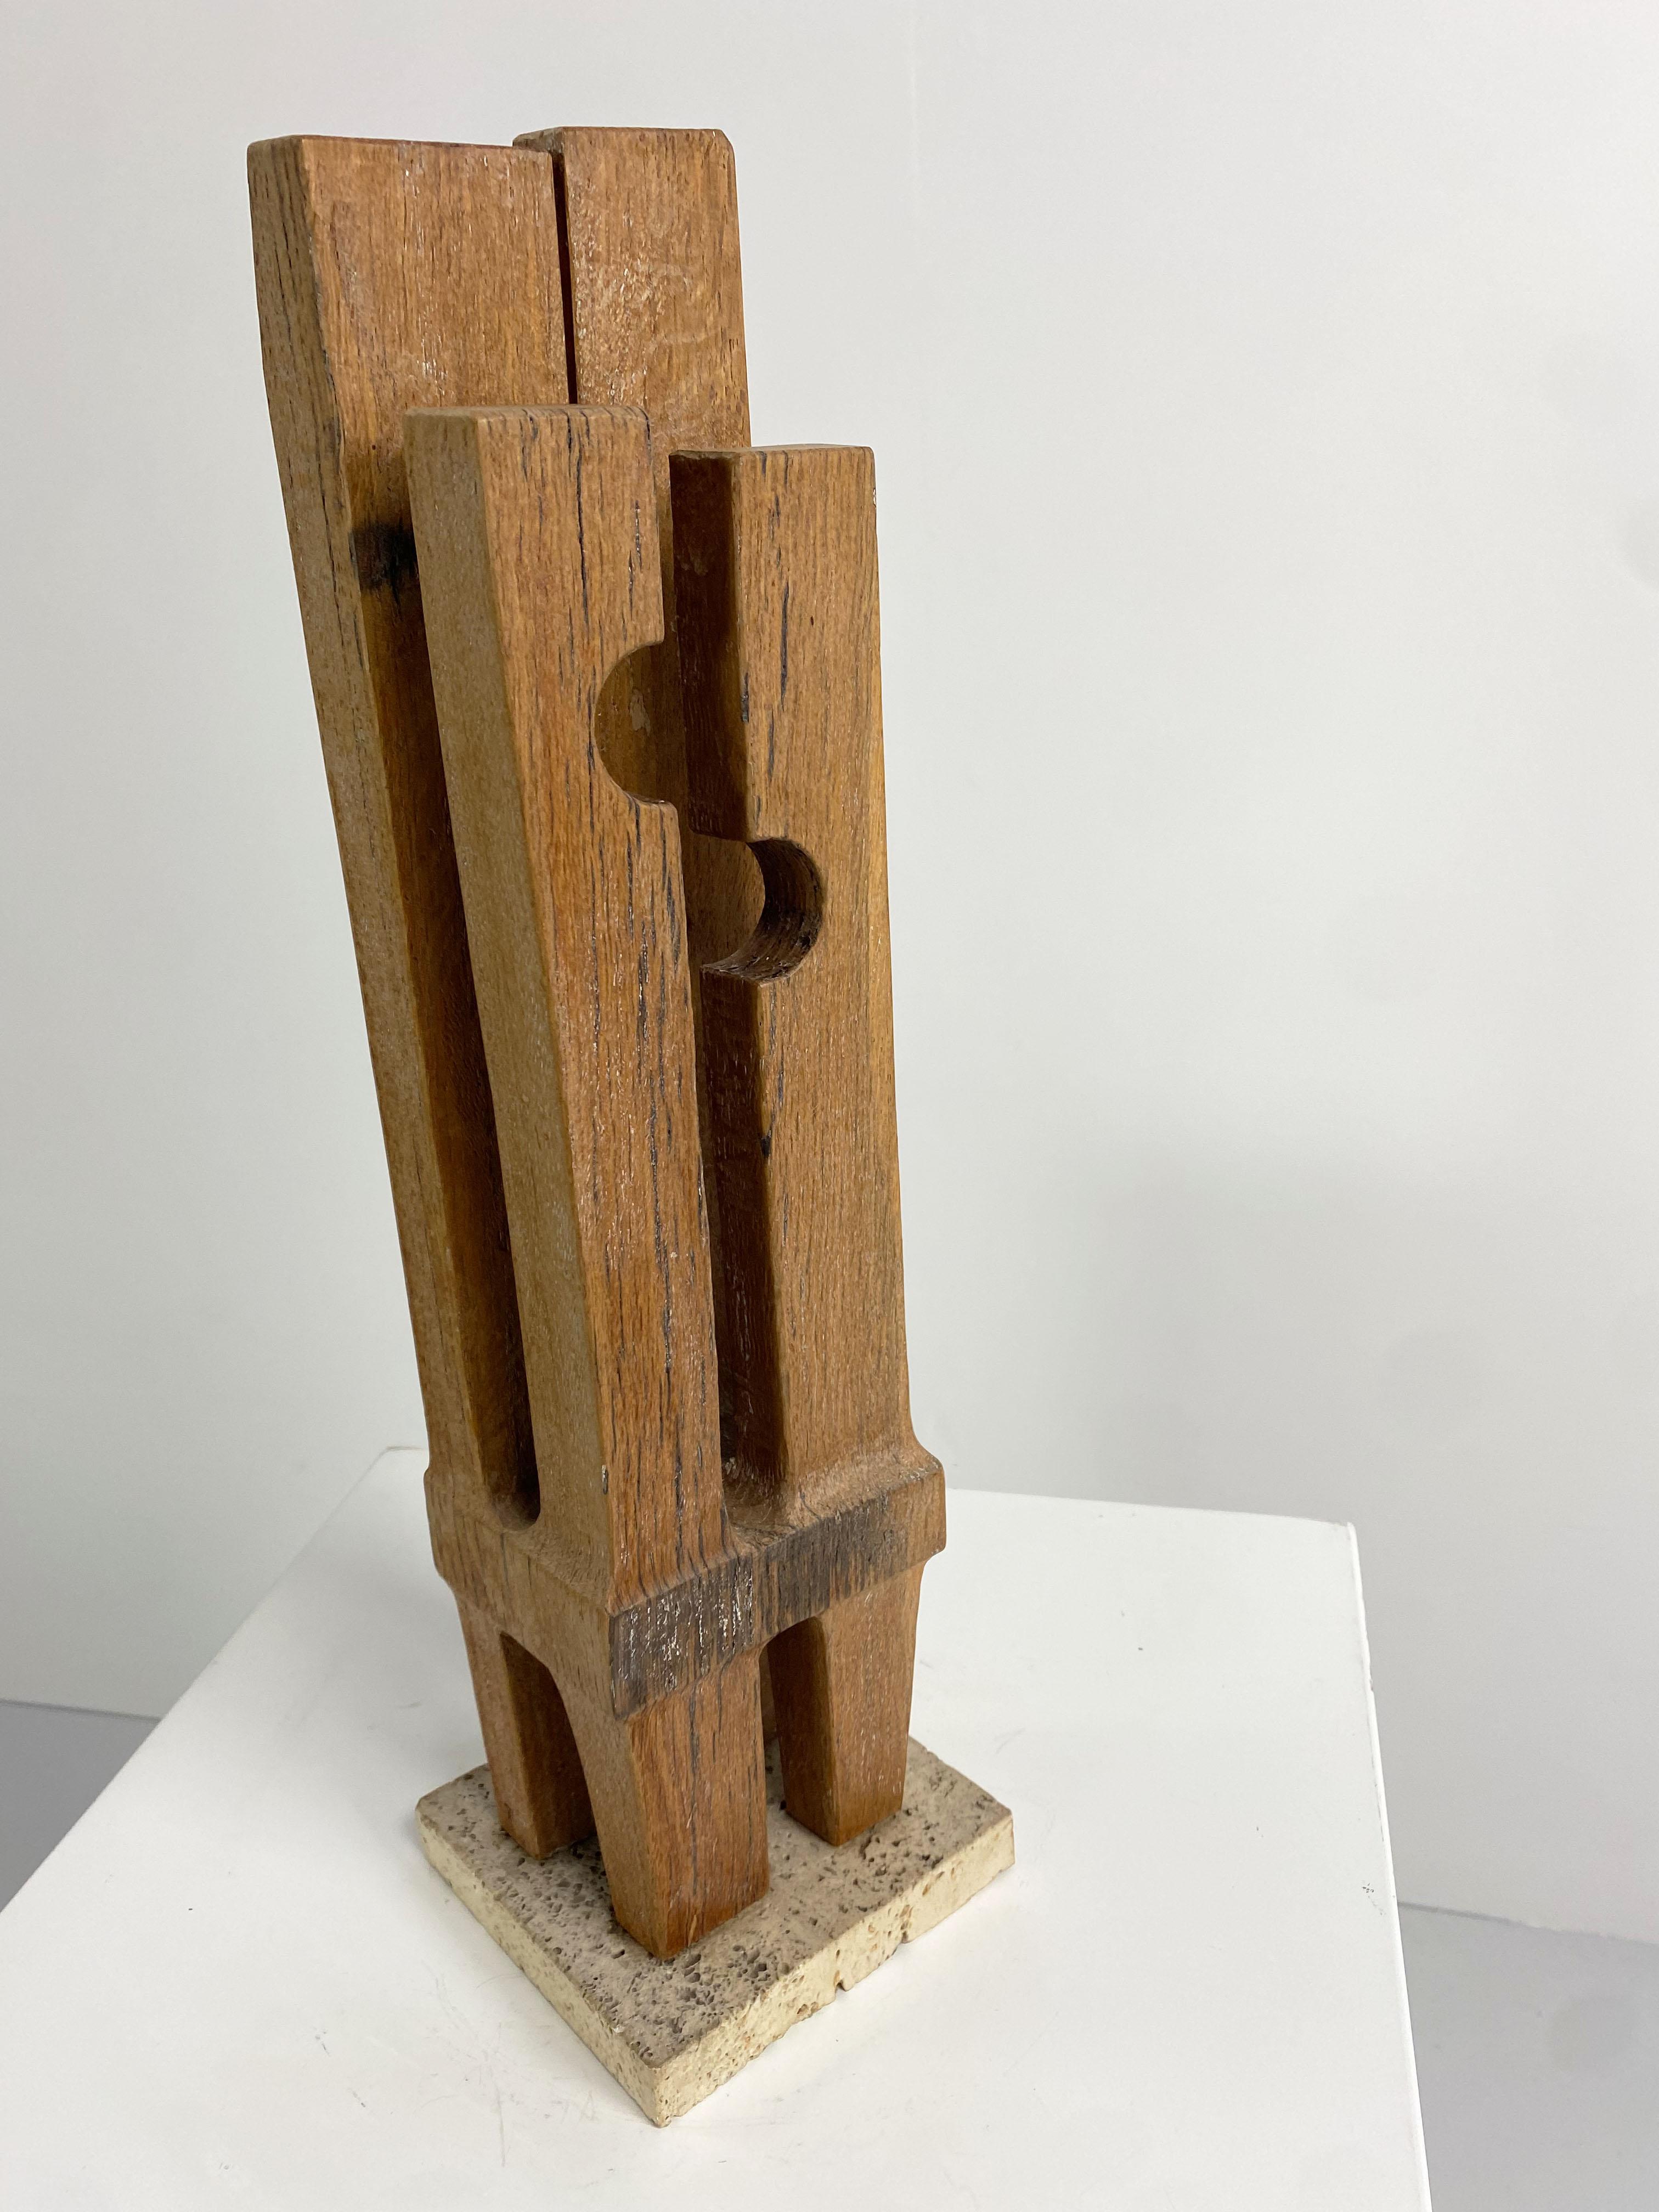 20th Century Abstract Wooden Sculpture 'Untitled' by Ronald Pope